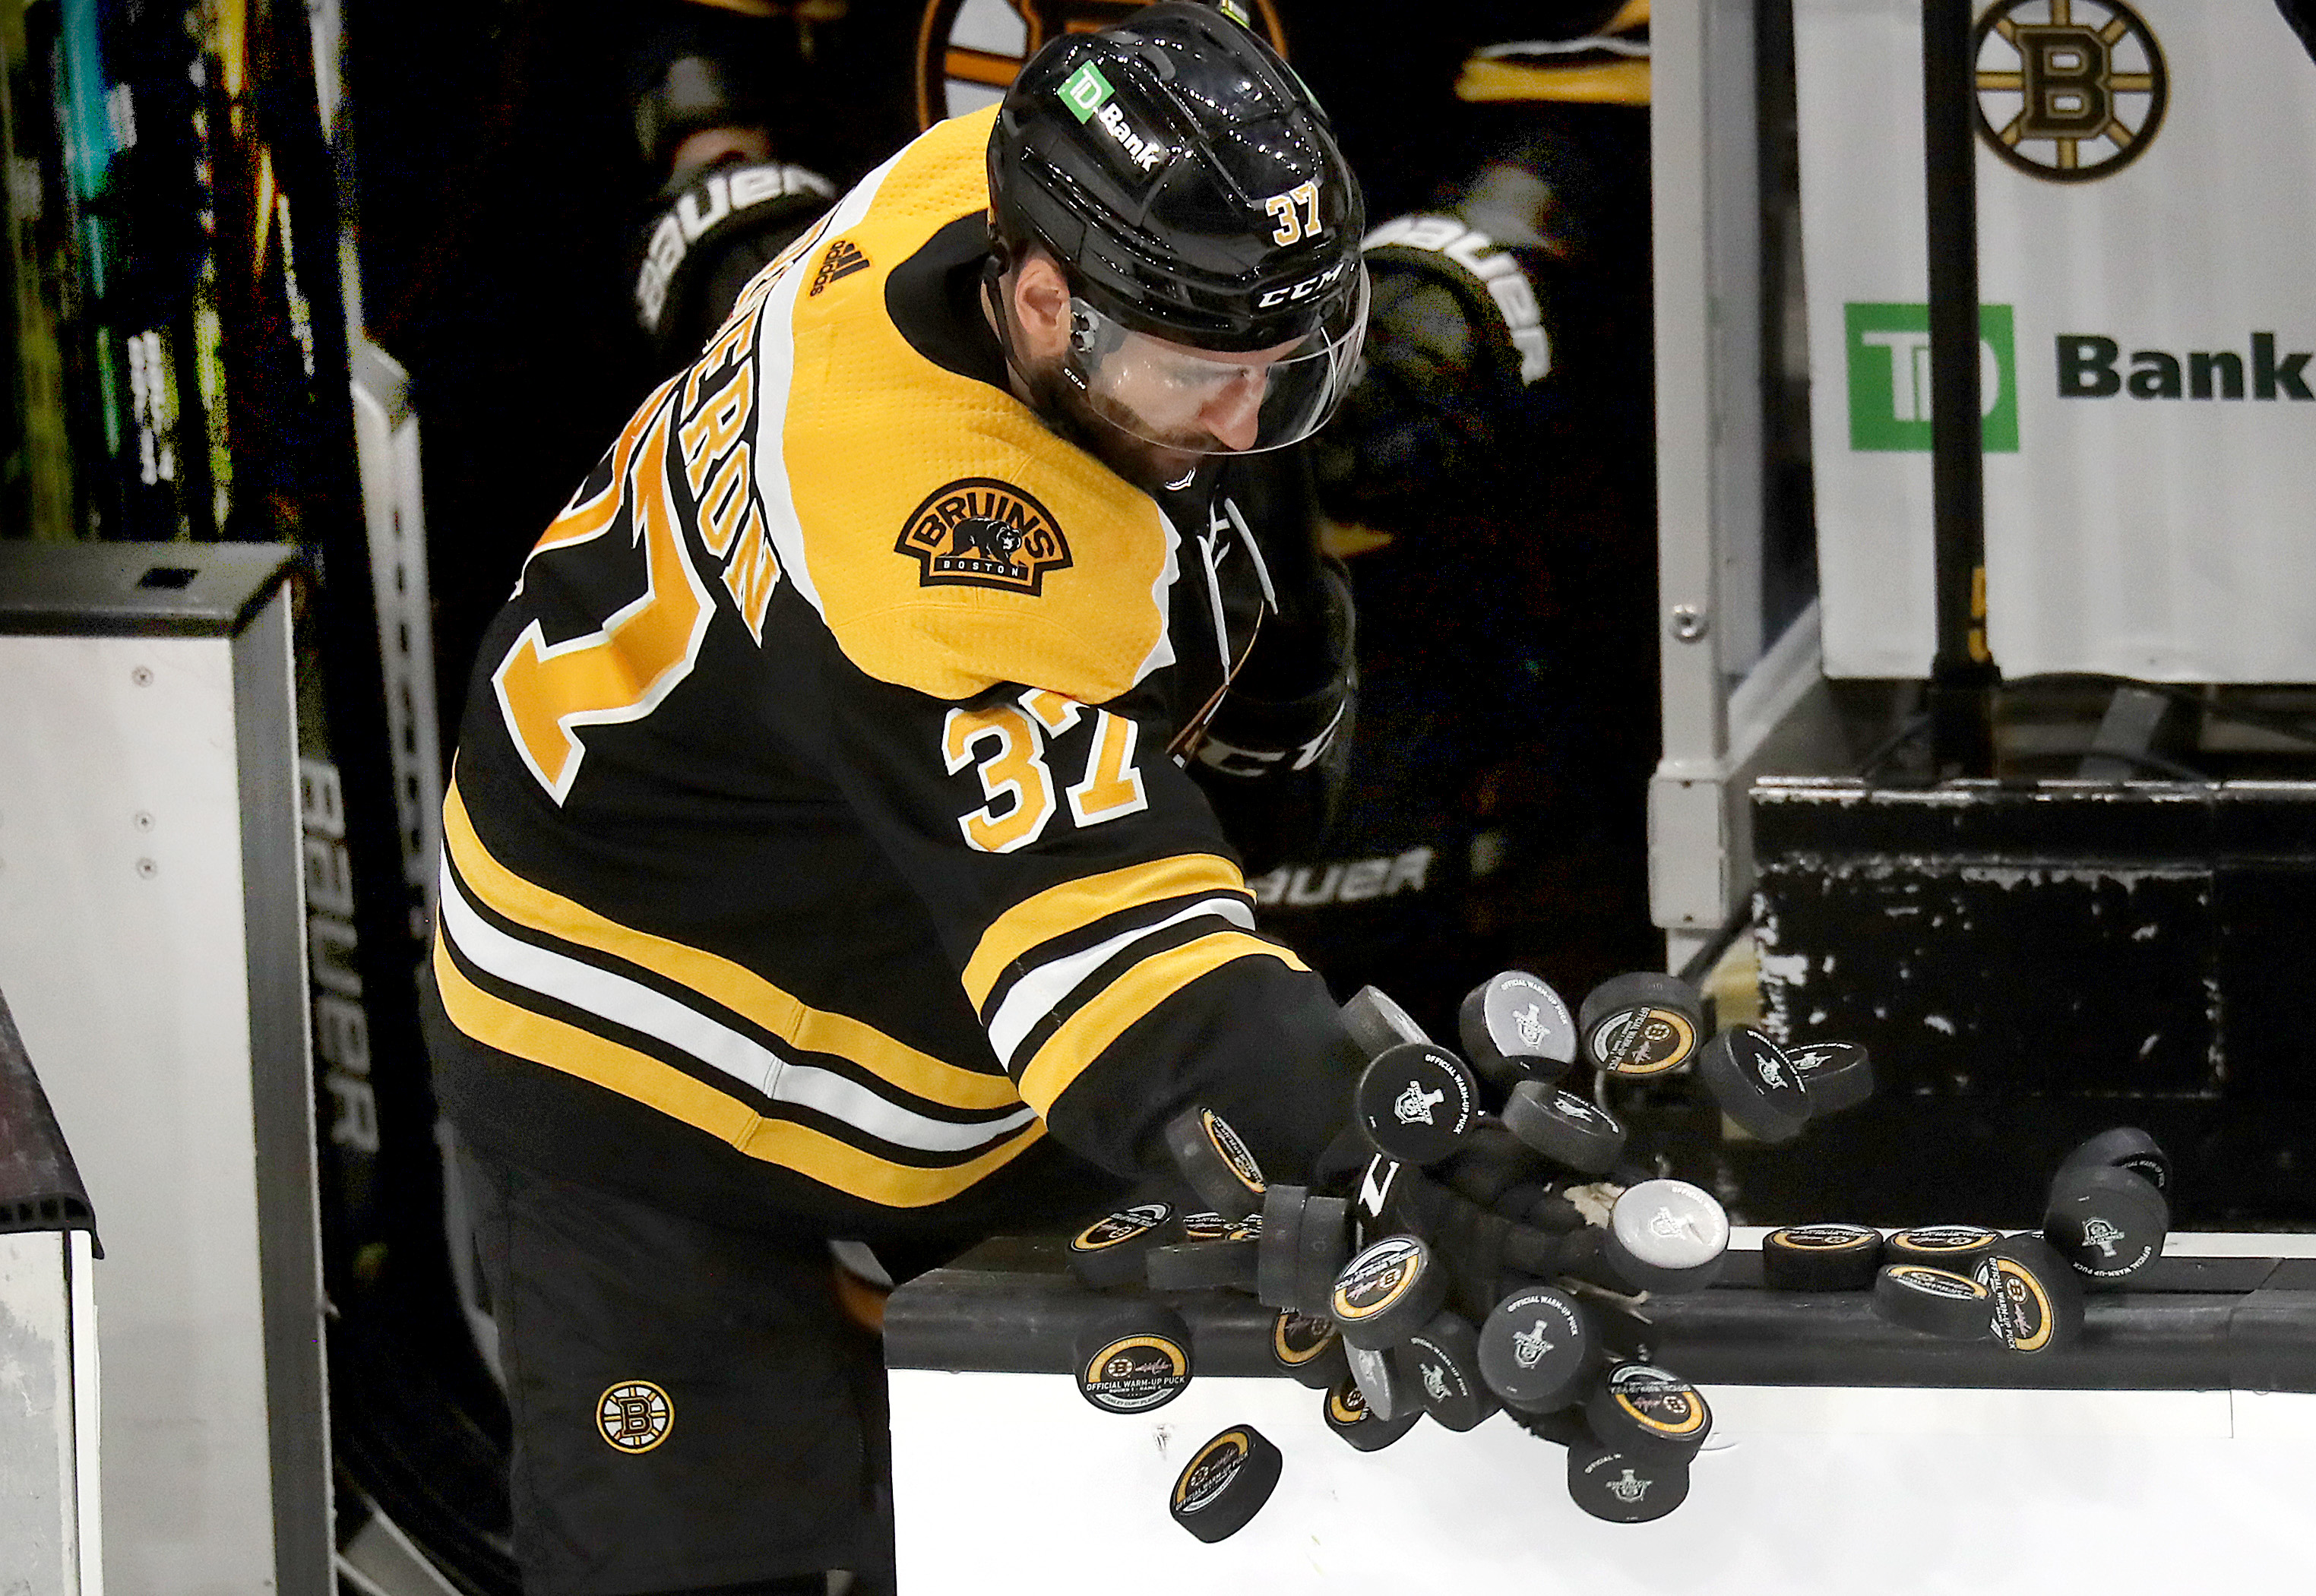 He embodies what it means to be a Bruin.' Patrice Bergeron officially named  Bruins captain - The Boston Globe